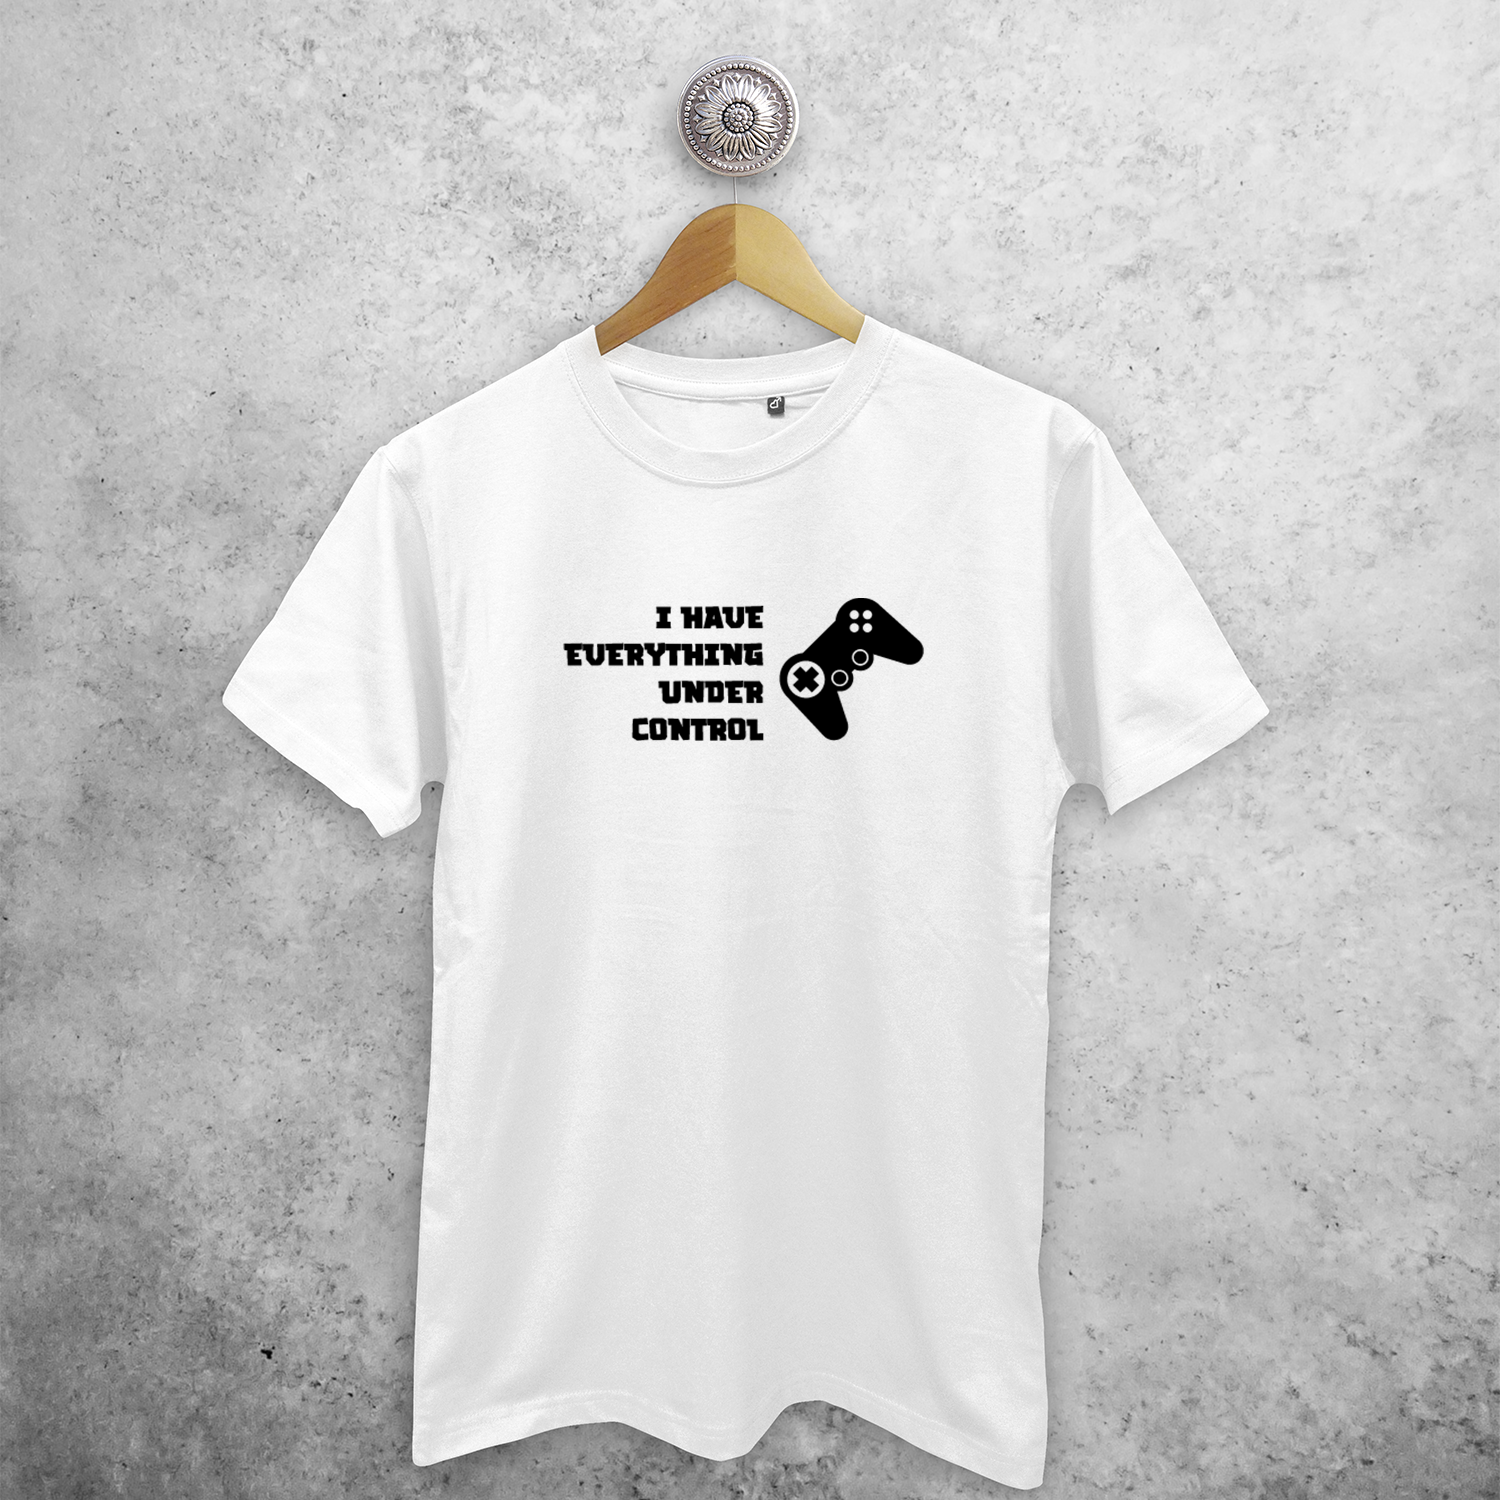 ‘I have everything under control’ adult shirt